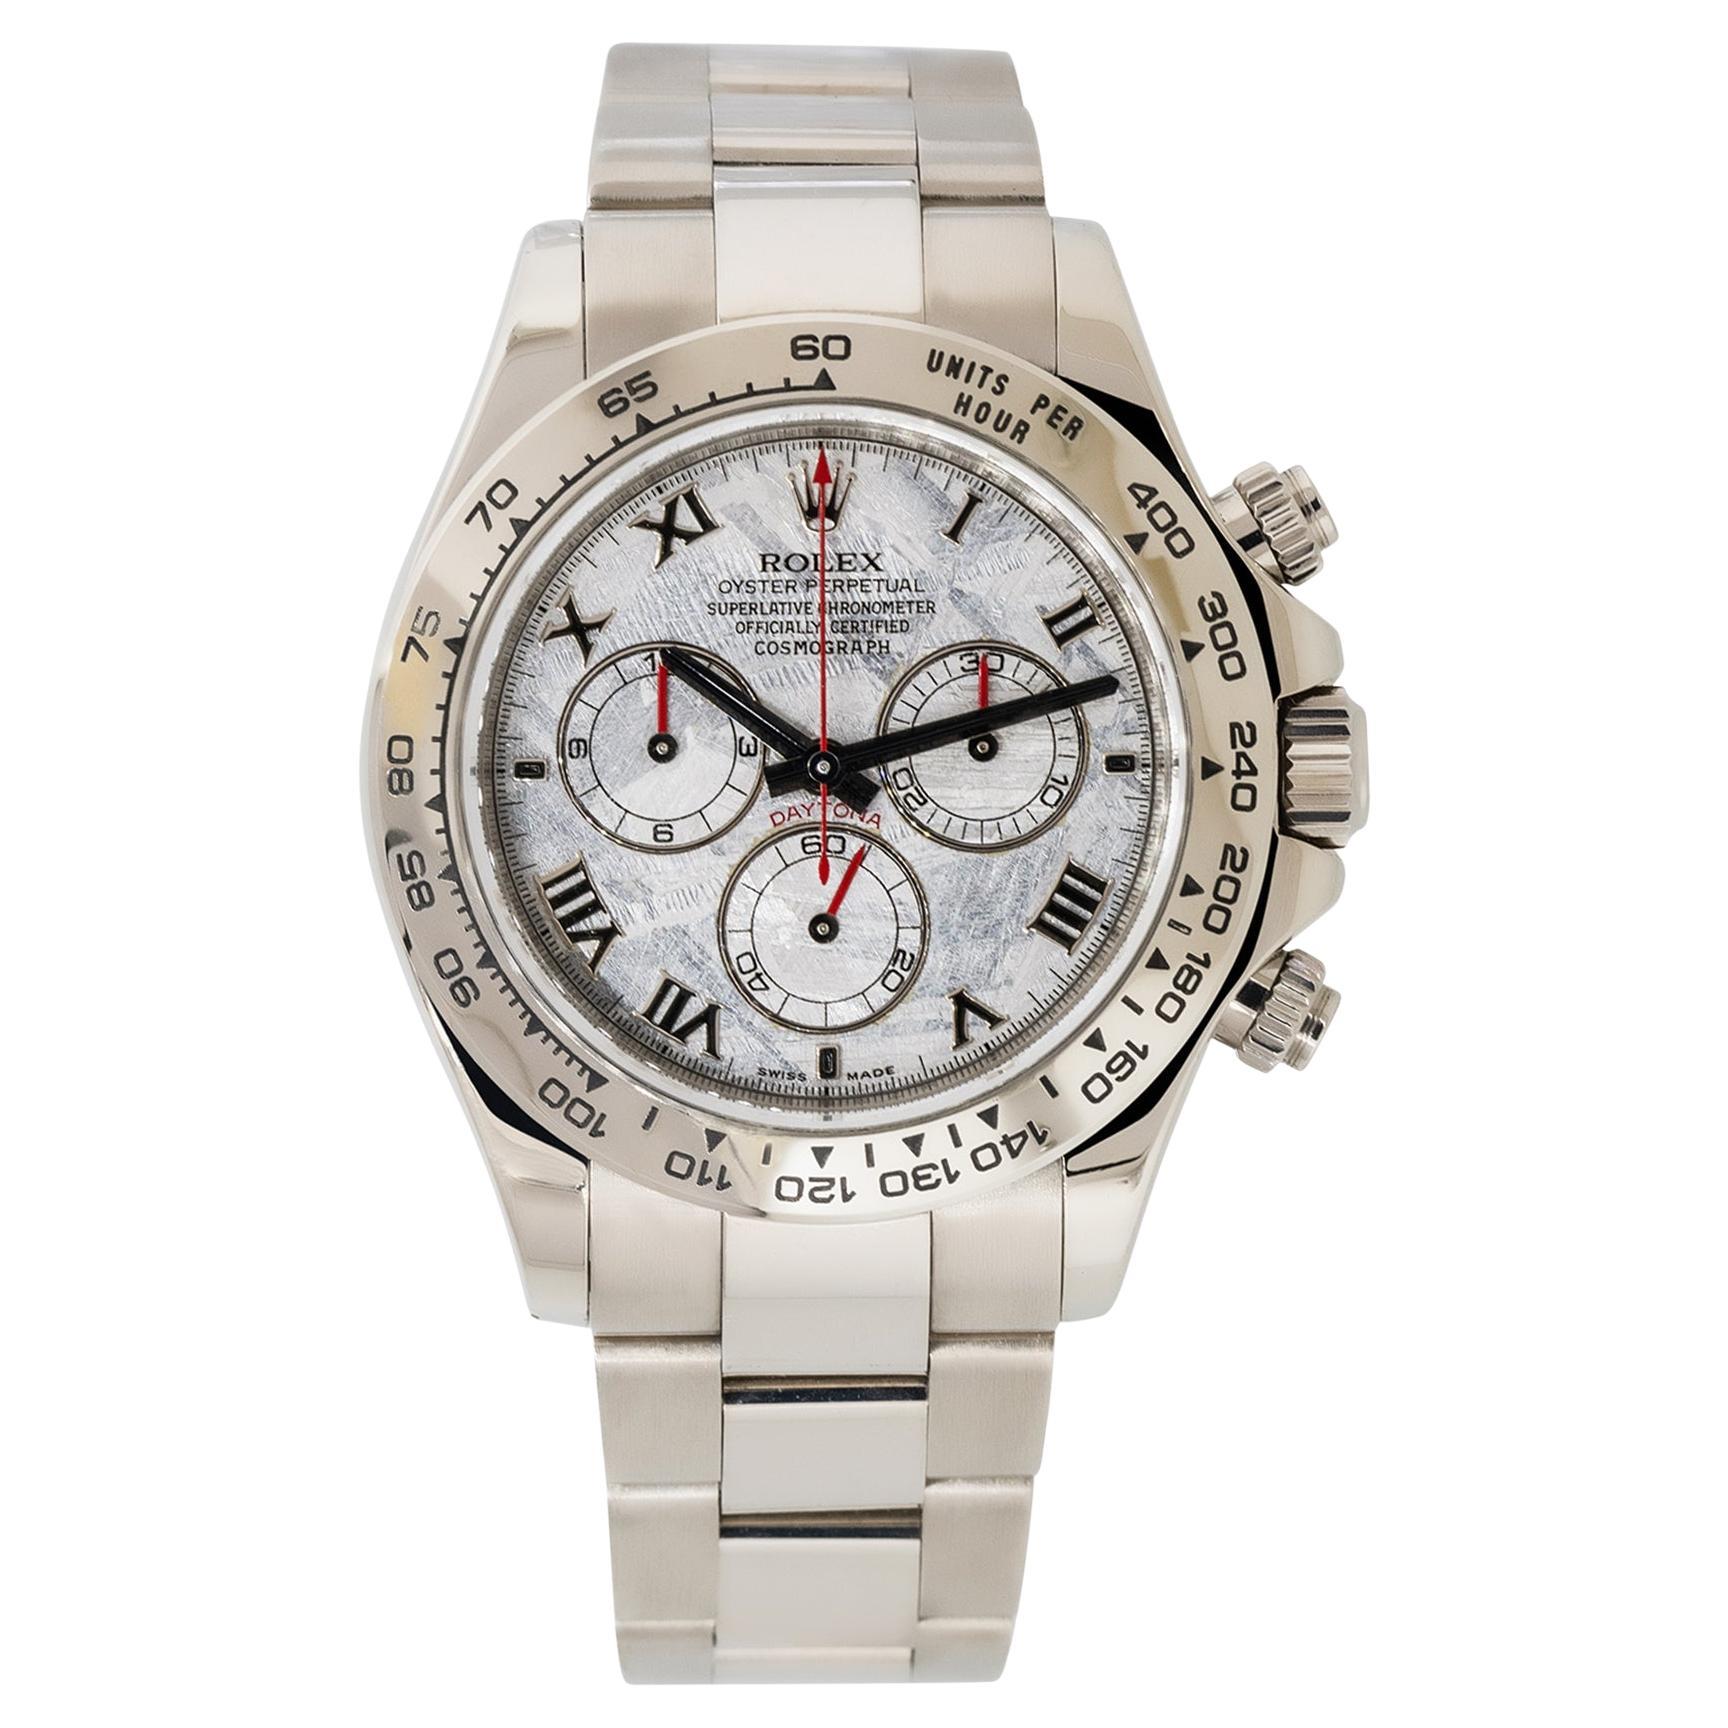 Rolex 116509 Daytona 18k White Gold Meteorite Dial Cosmograph Watch For Sale